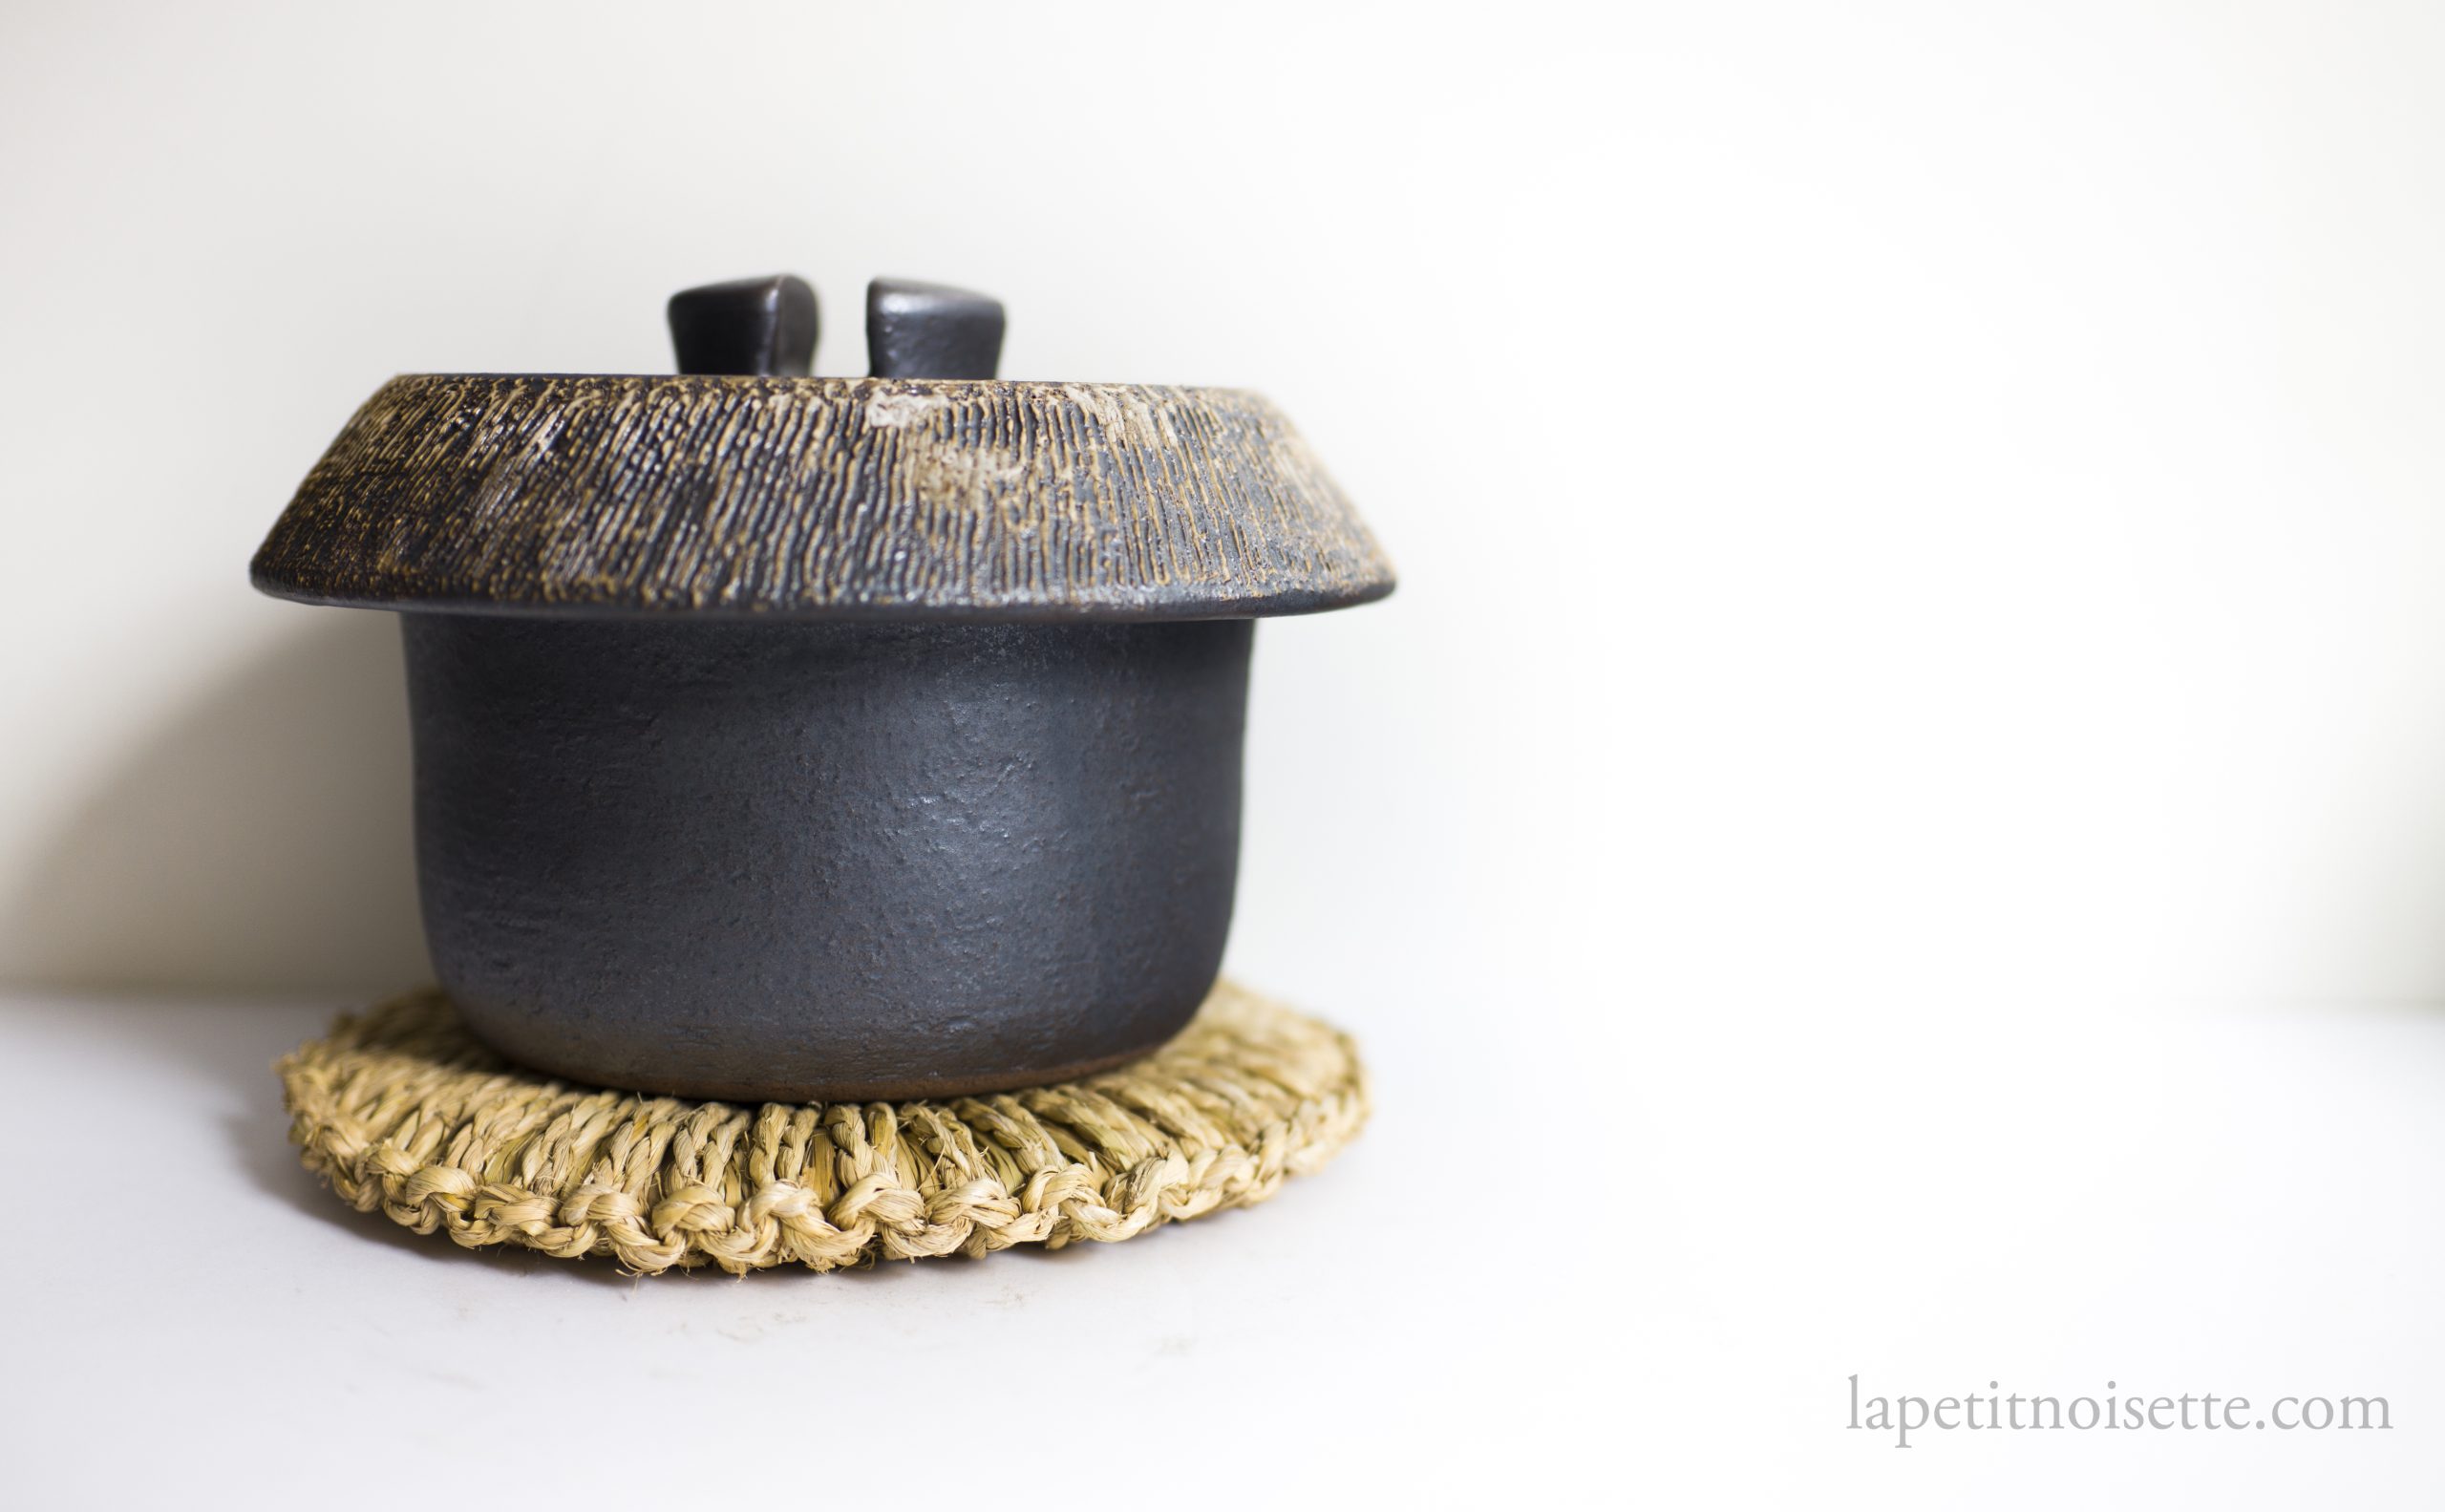 A traditional Japanese clay pot for cooking rice by Anraku Kiln.